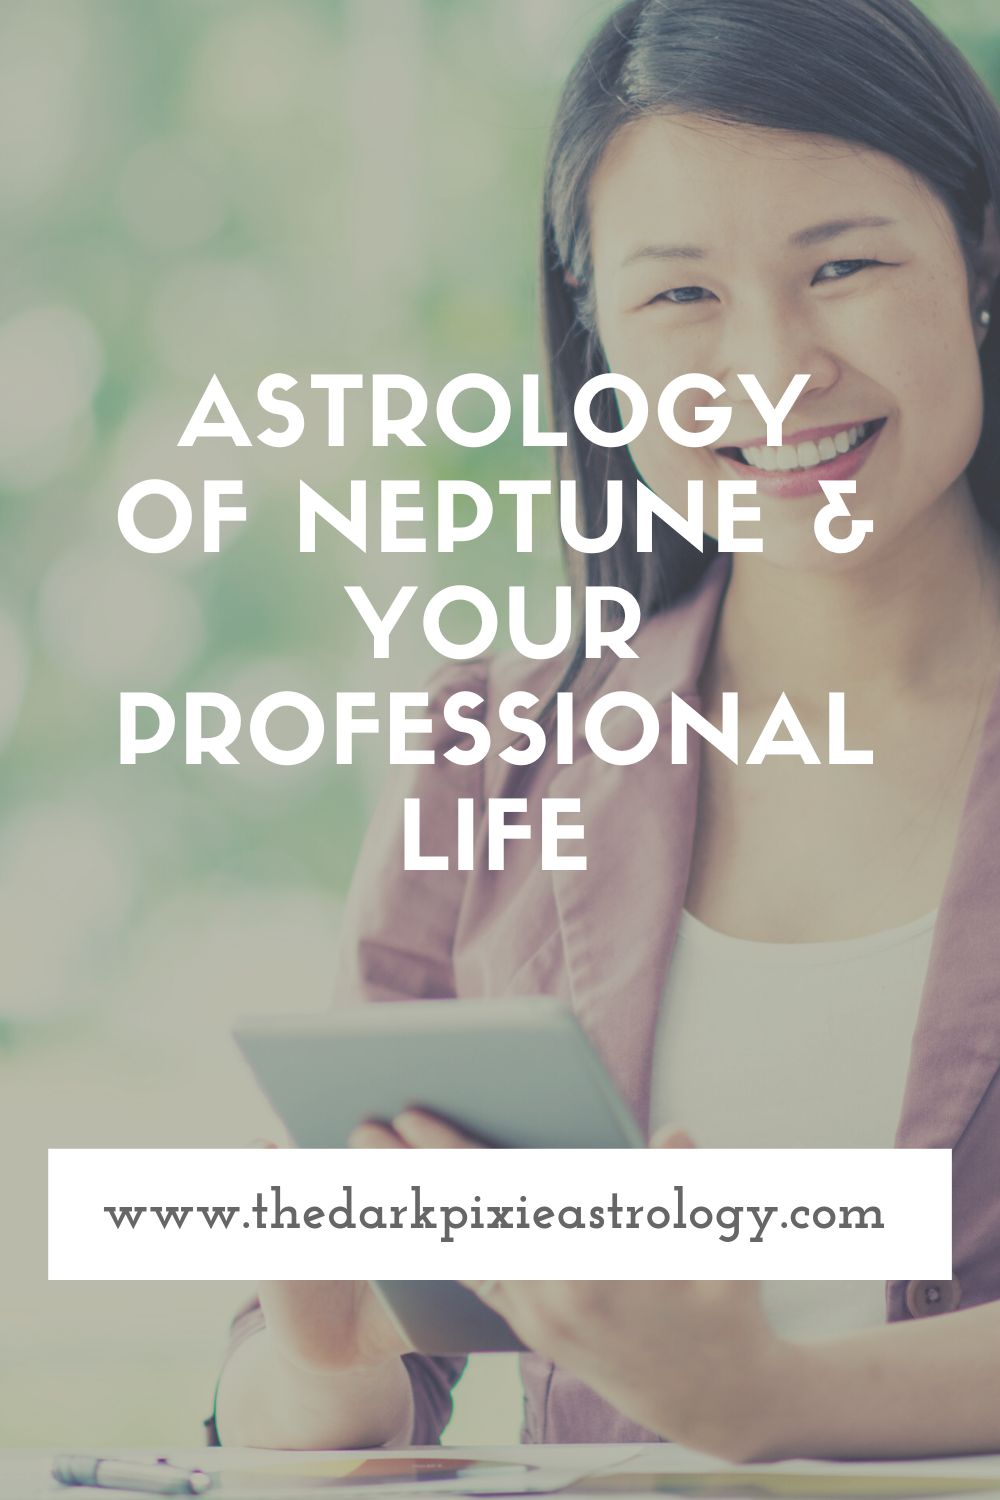 Astrology of Neptune & Your Professional Life - The Dark Pixie Astrology